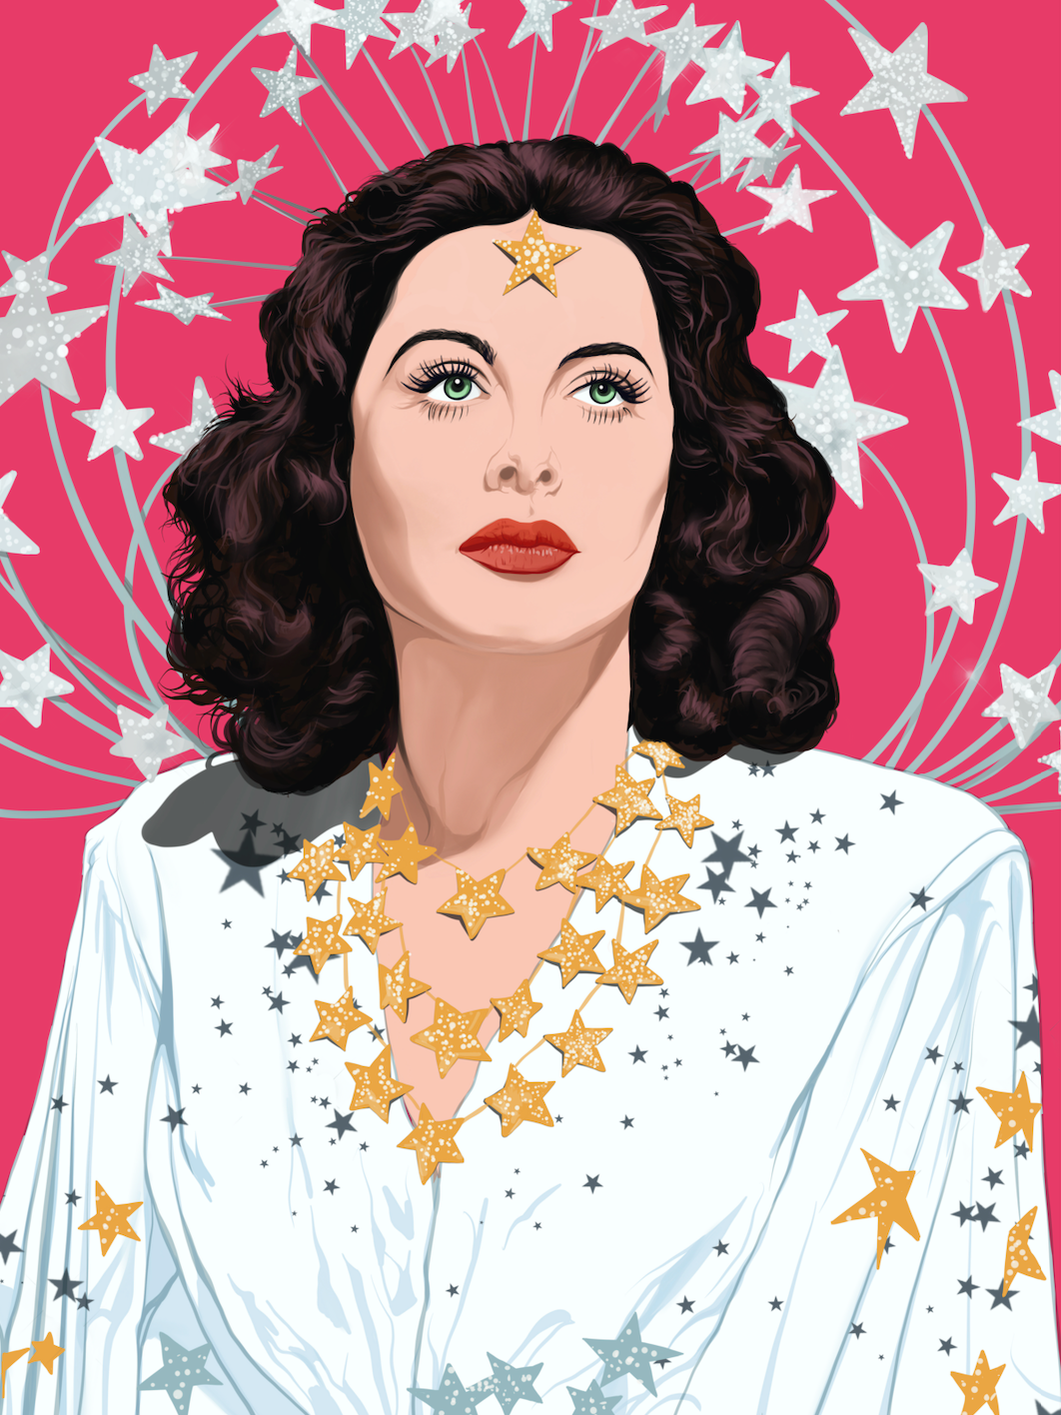 An illustration by Ryan Hodge of female Hollywood actor and inventor, Hedy Lamarr.  She is shown wearing a white dress covered in metallic star on a bright pink background.  She has a star on her forehead and stars in the background. 
